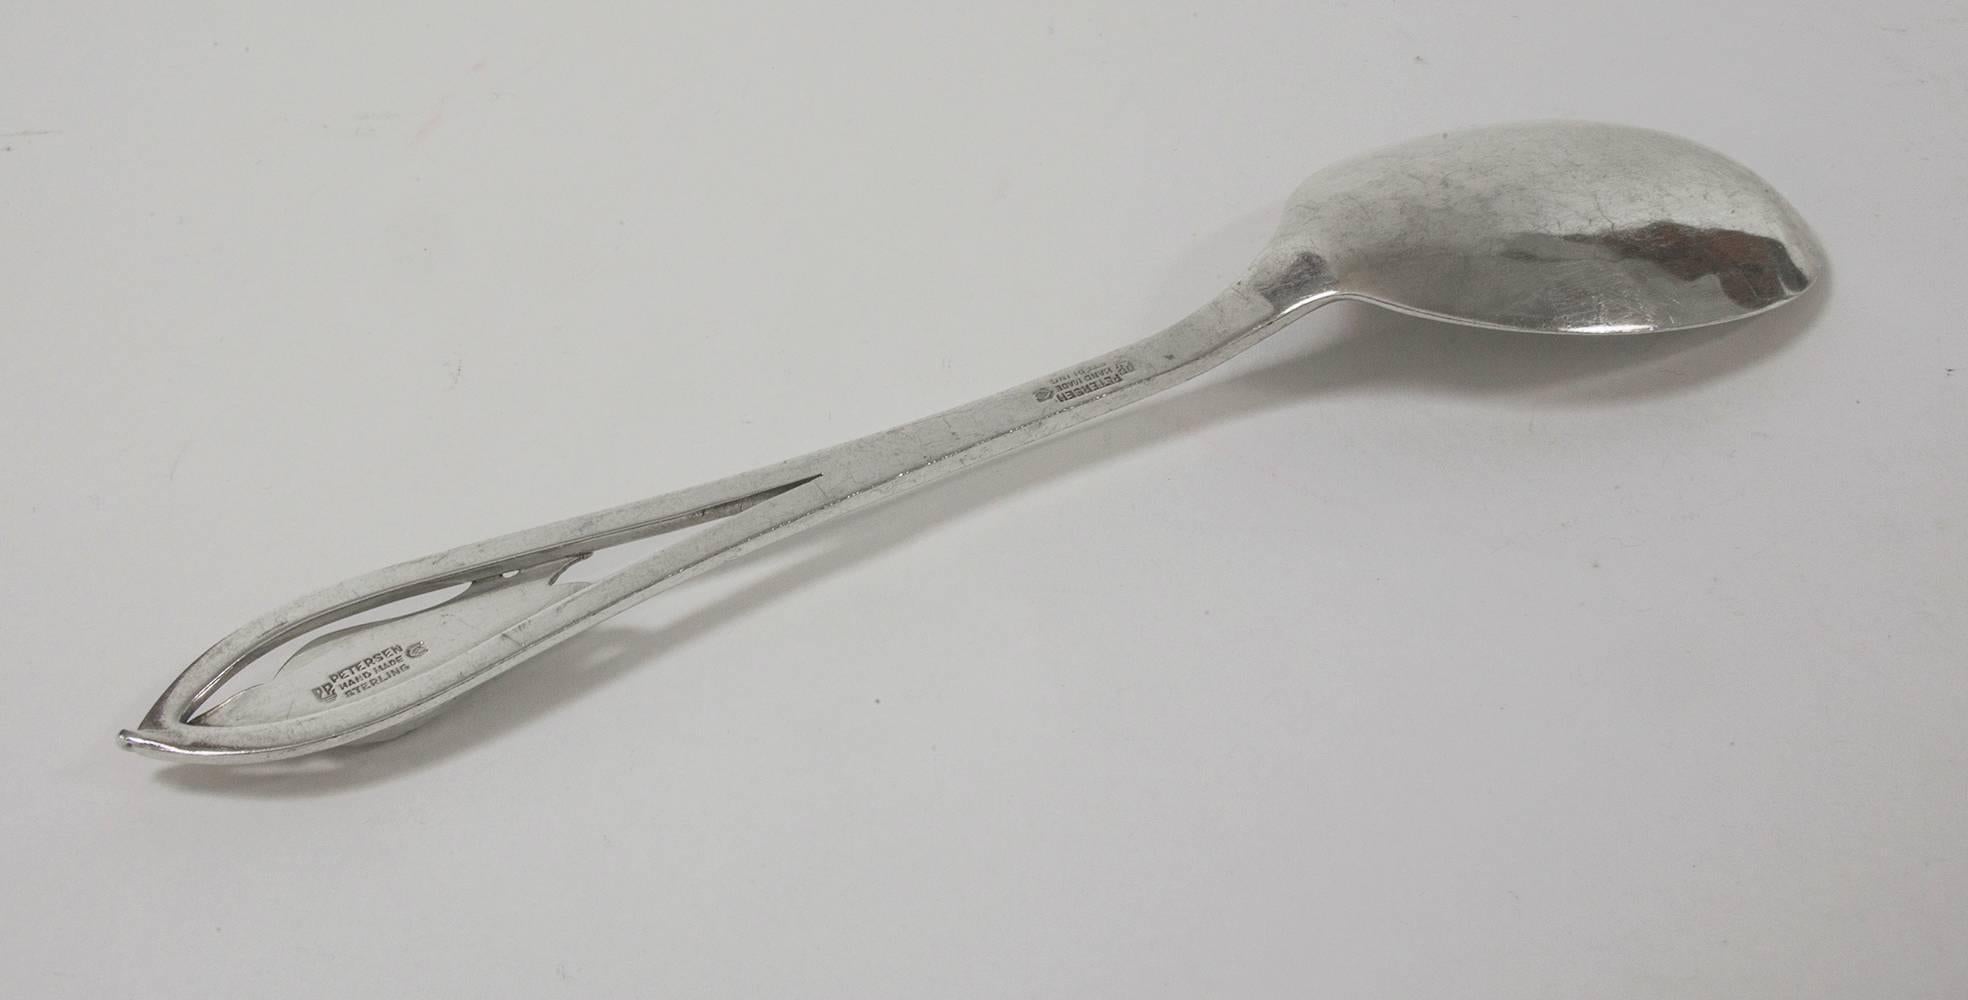 Mid-Century Modern sterling silver serving spoon by renowned Canadian Silversmith Carl Poul Petersen, handle adorned with blossom or pea pod like flower. Hand-hammered; No monograms or engraving; Signed 